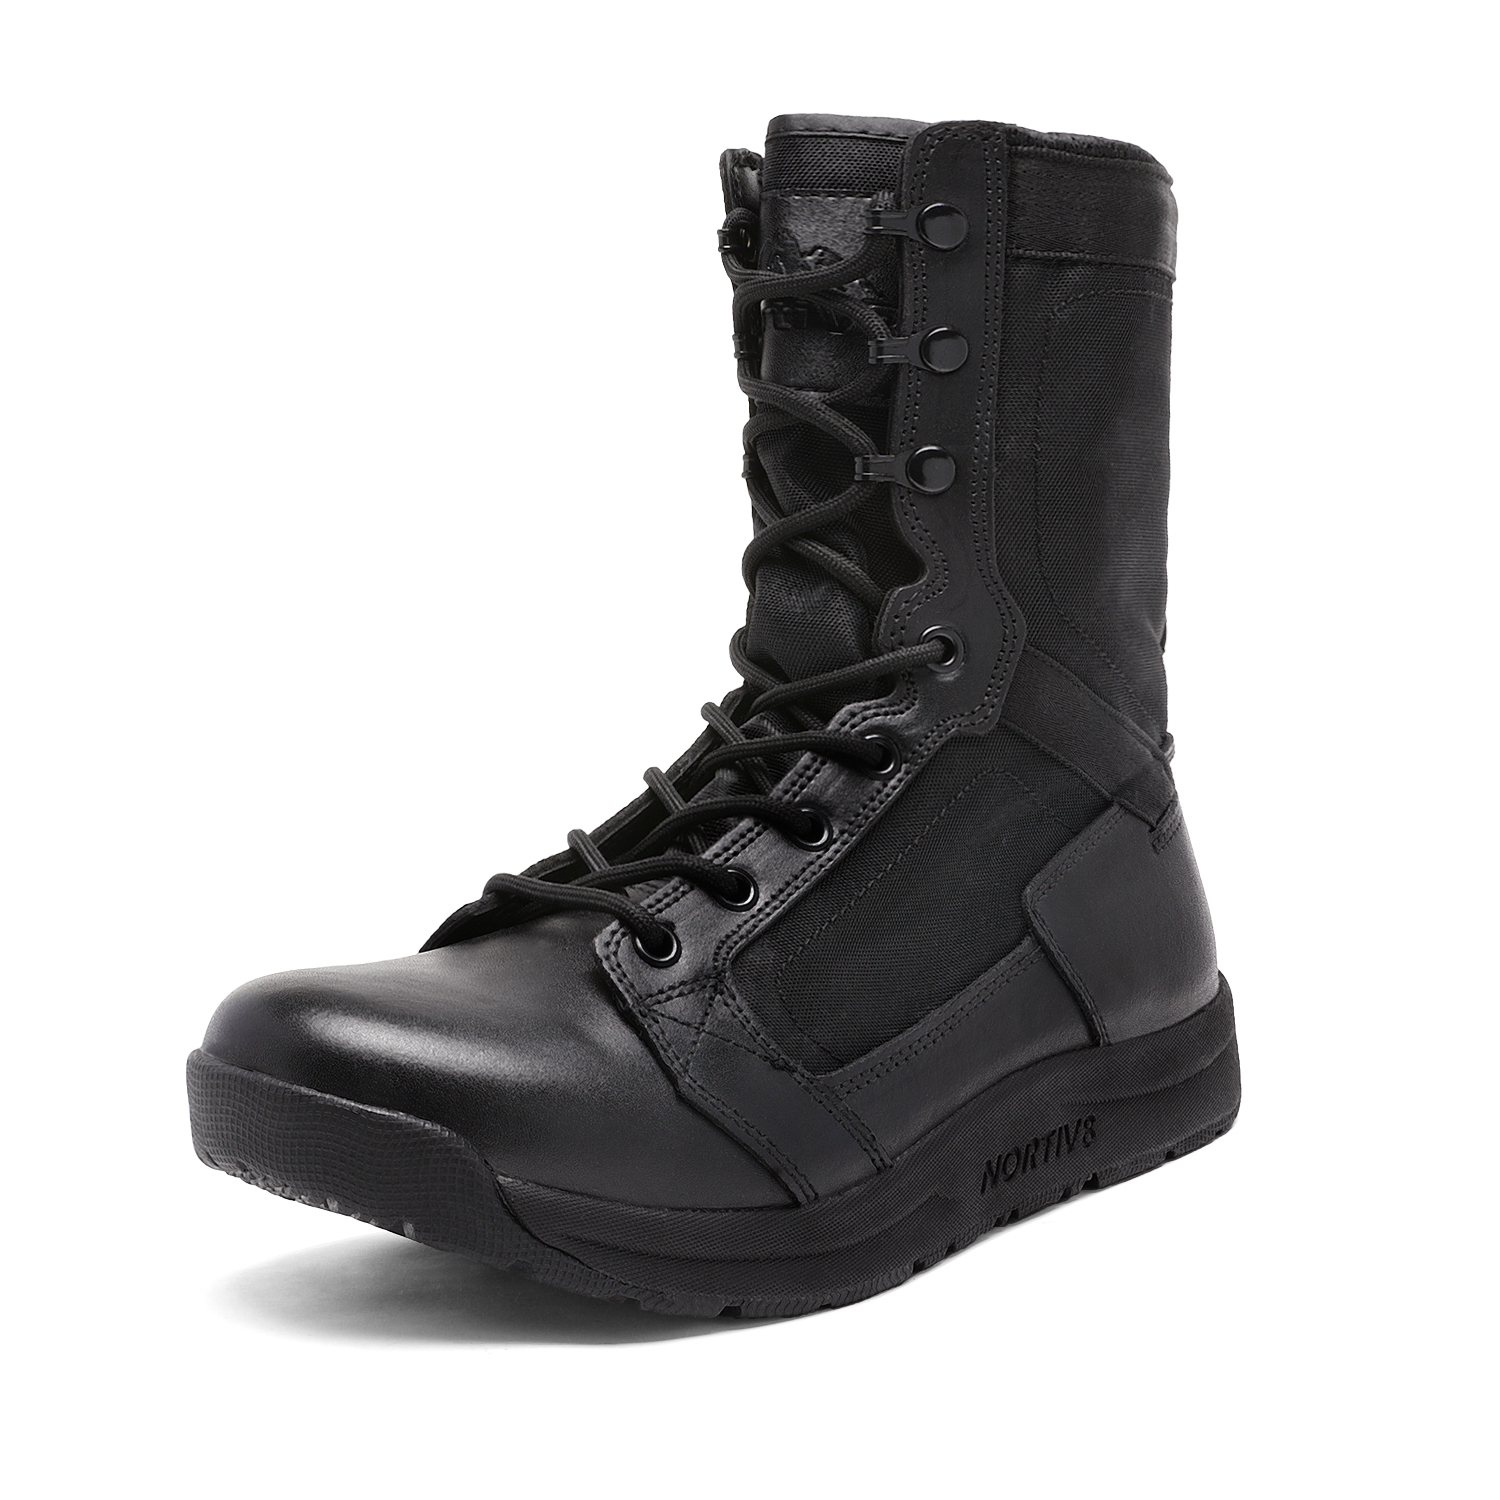 Nortiv 8 Men's Military Tactical Boots Lightweight Leather Work Boots Delta-high BLACK Size 8 - image 1 of 6